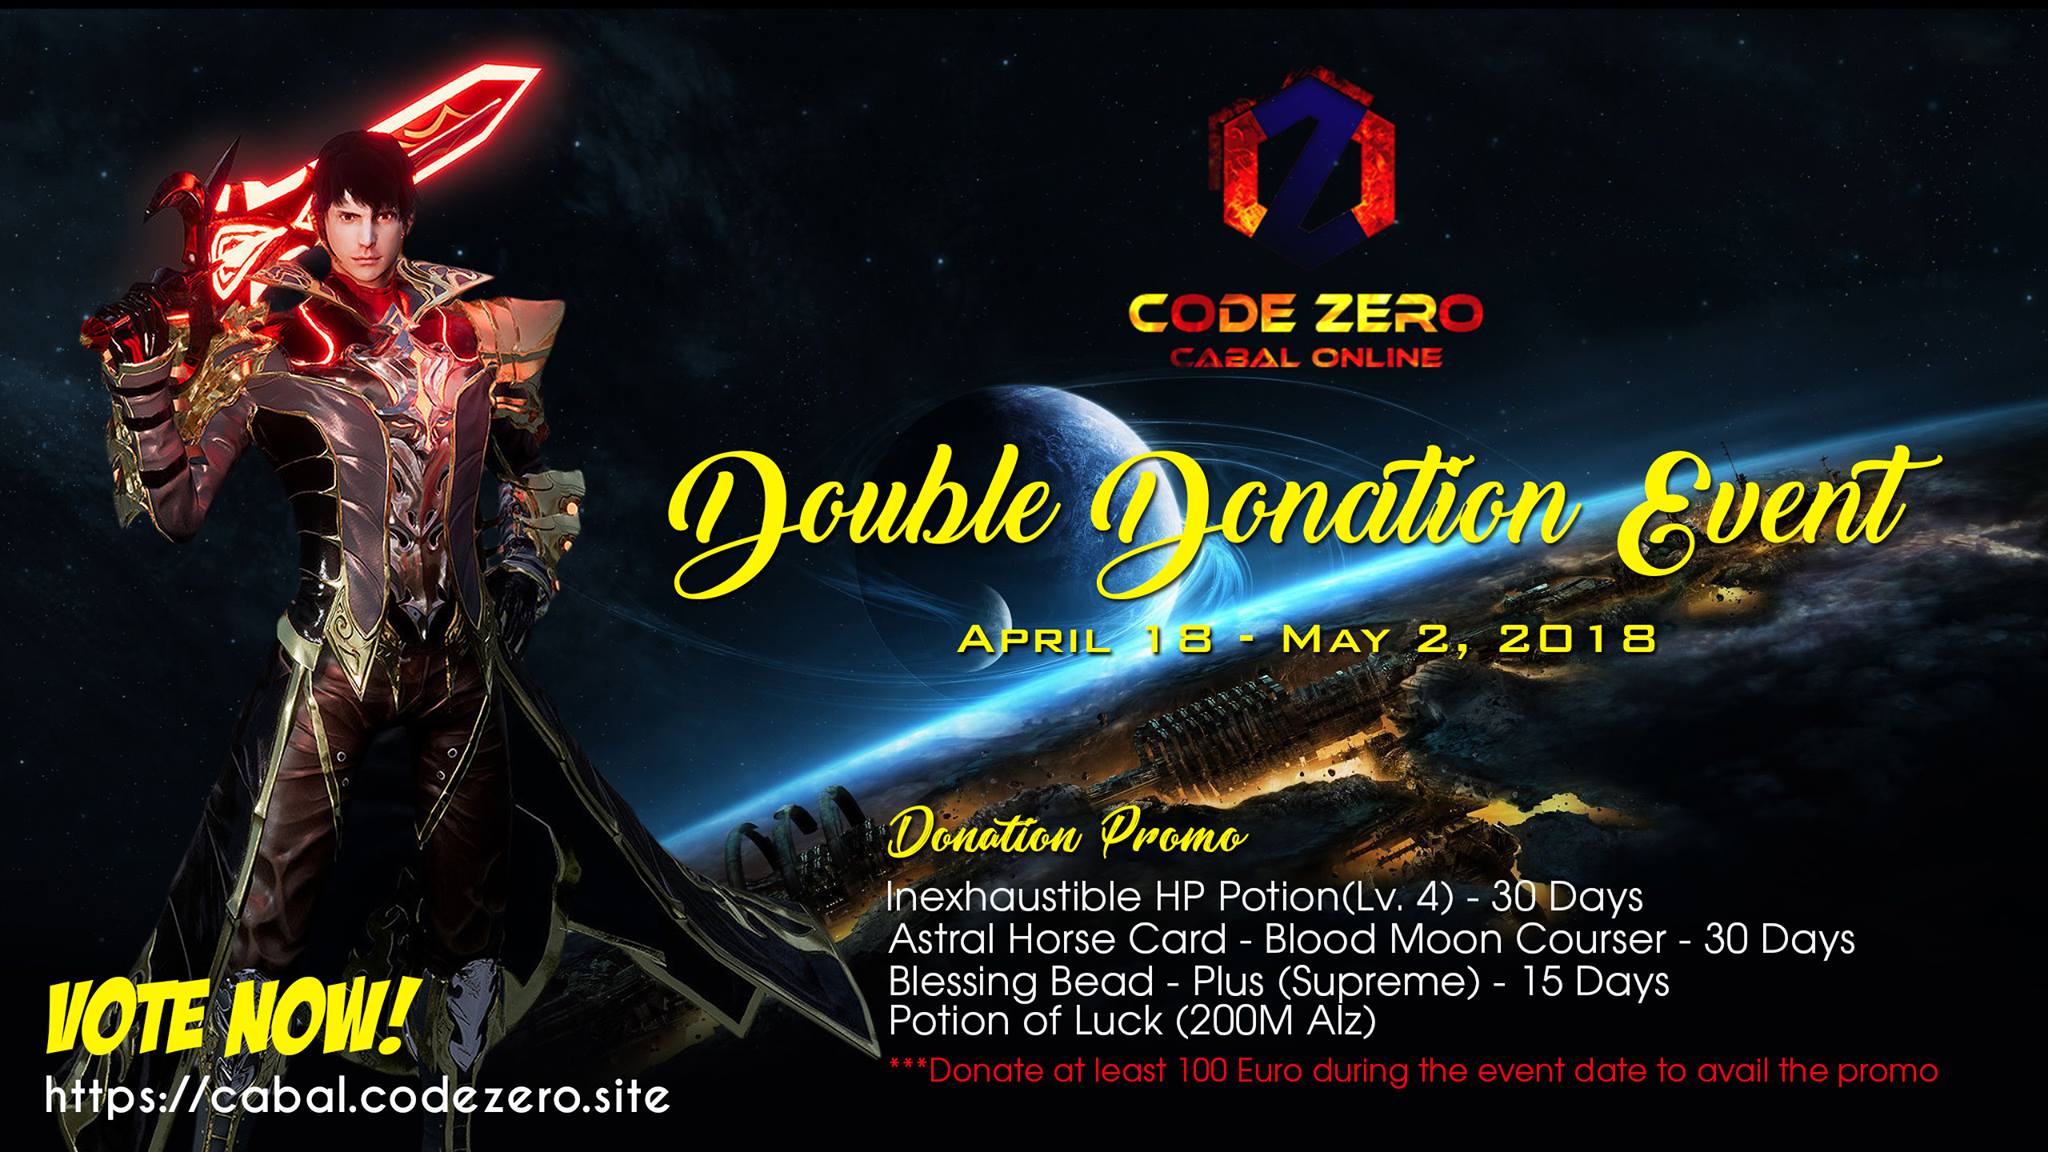 zzzxxxccc - [cabal online] code zero "gladiator & force gunner" - play to earn real money - RaGEZONE Forums